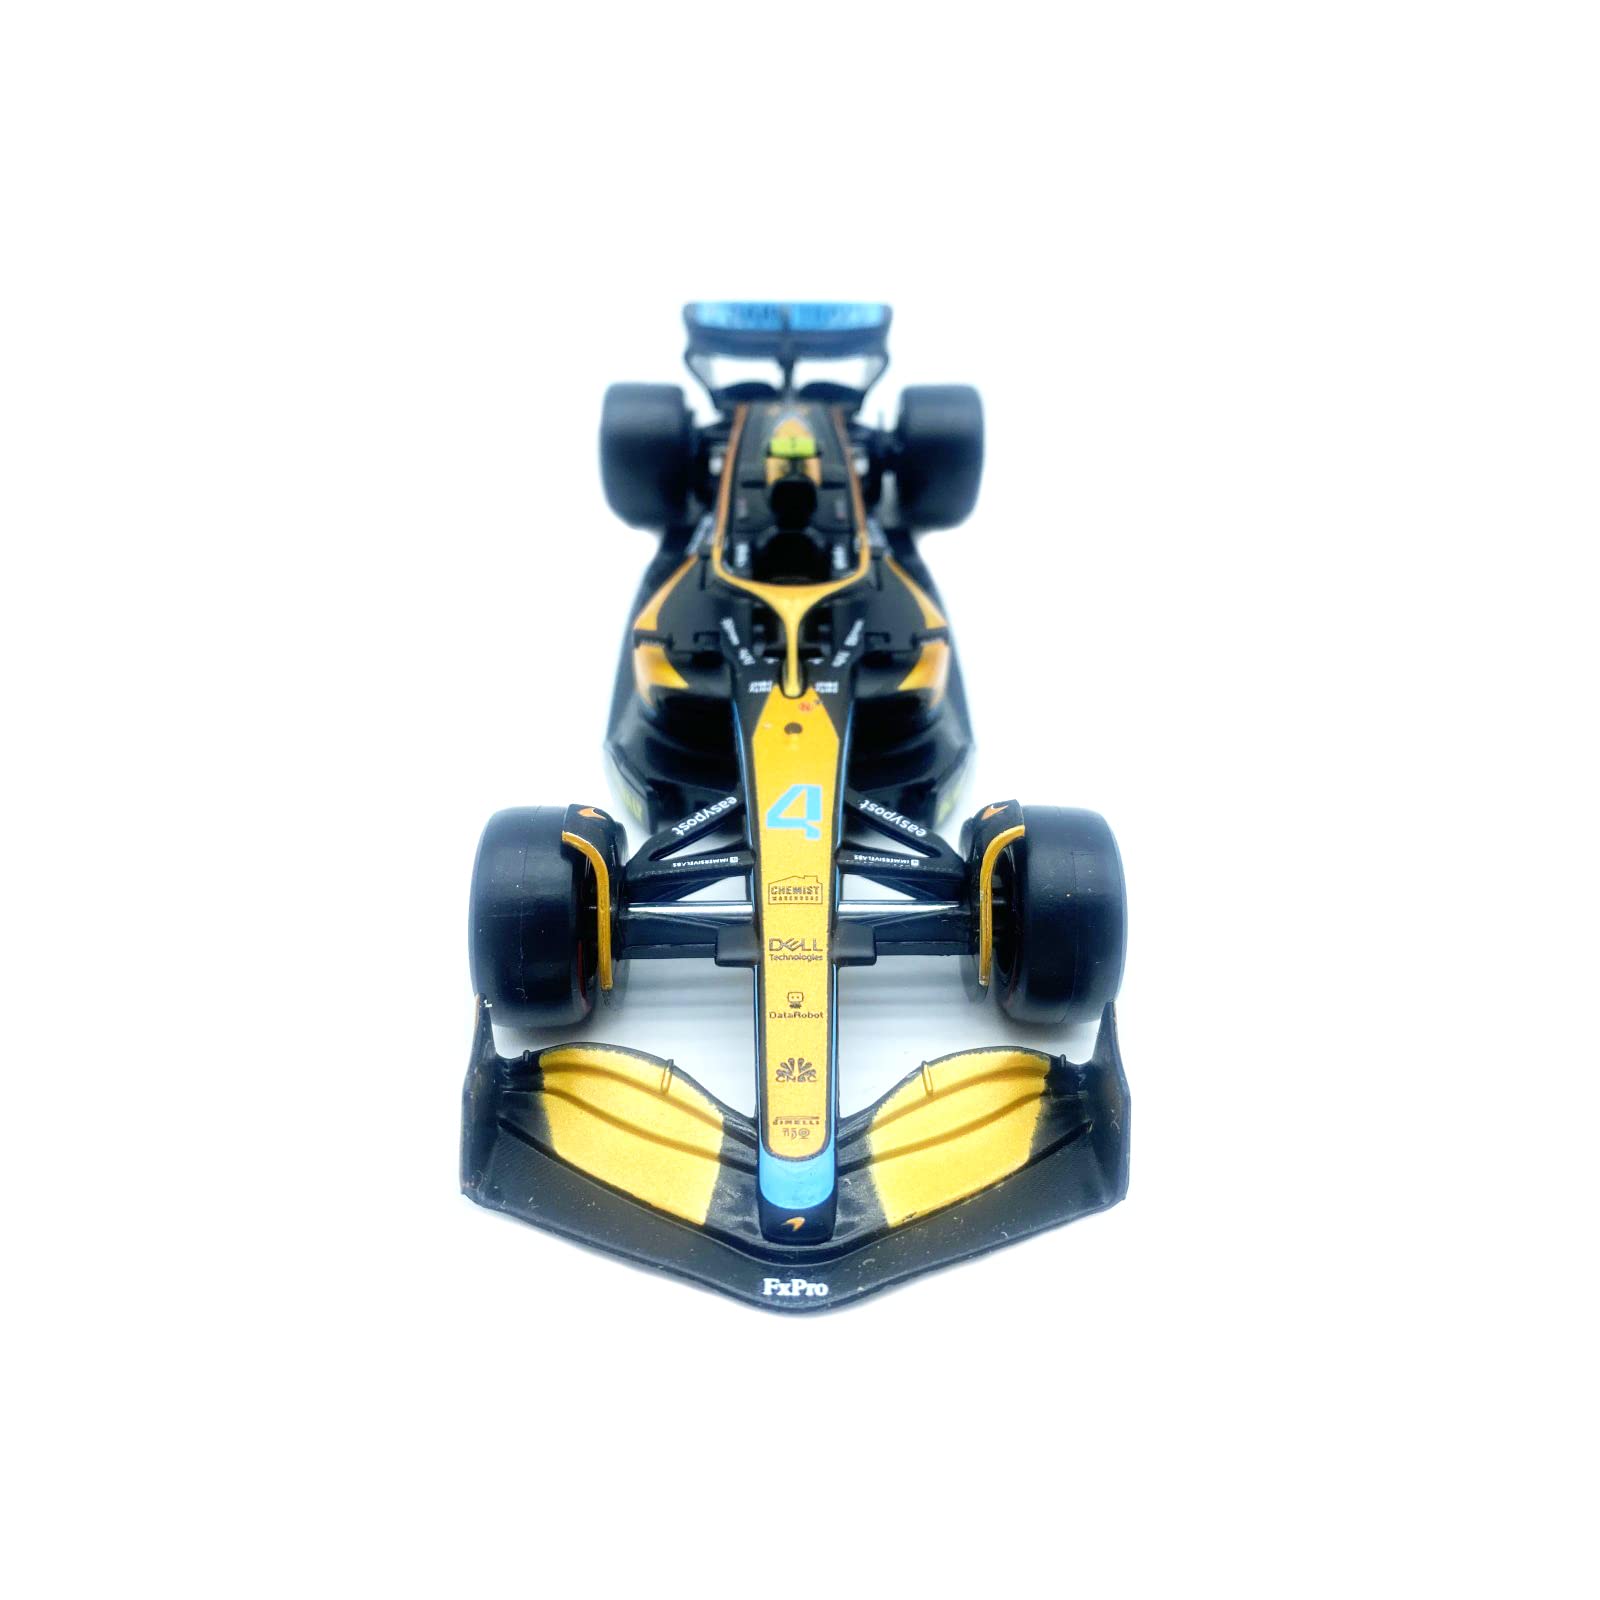 HTLNUZD Bburago 1:43 2022 F1 MCL36#4 Lando Norris F1 Racing 1/43 MCL36#4 Formula One Alloy Luxury Die Cast Collection Vehicles Model Gift